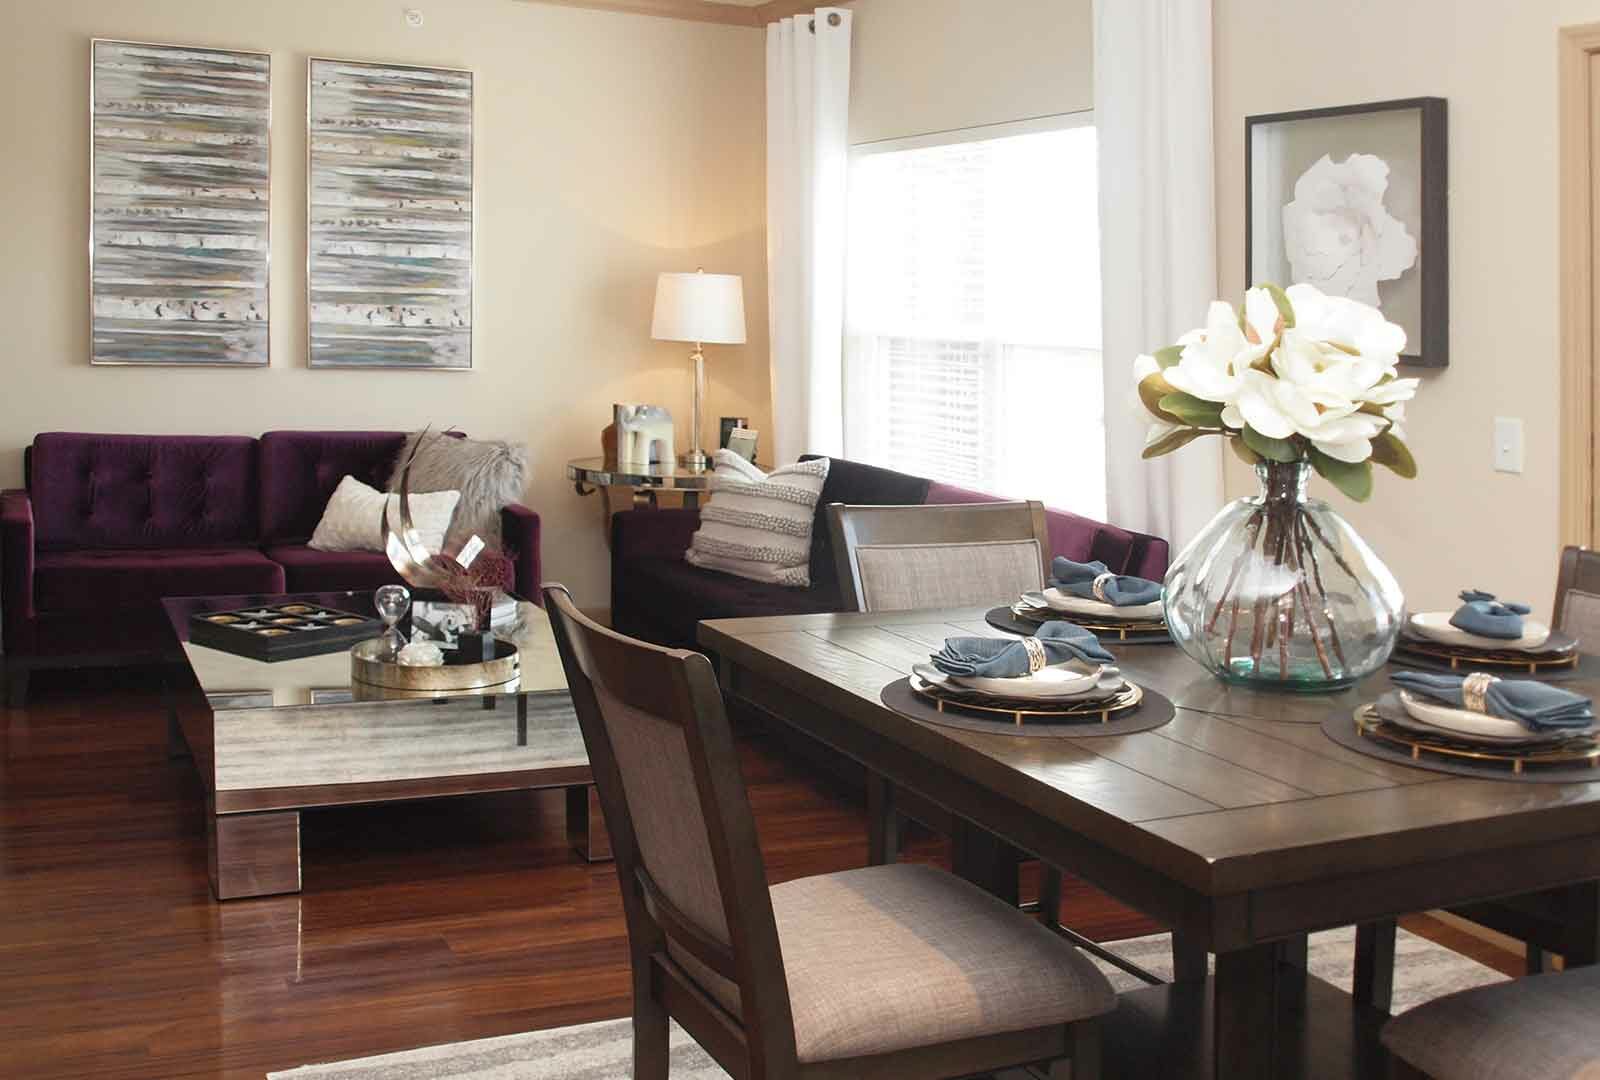 Fully decorated living and dining room space at Palmera.